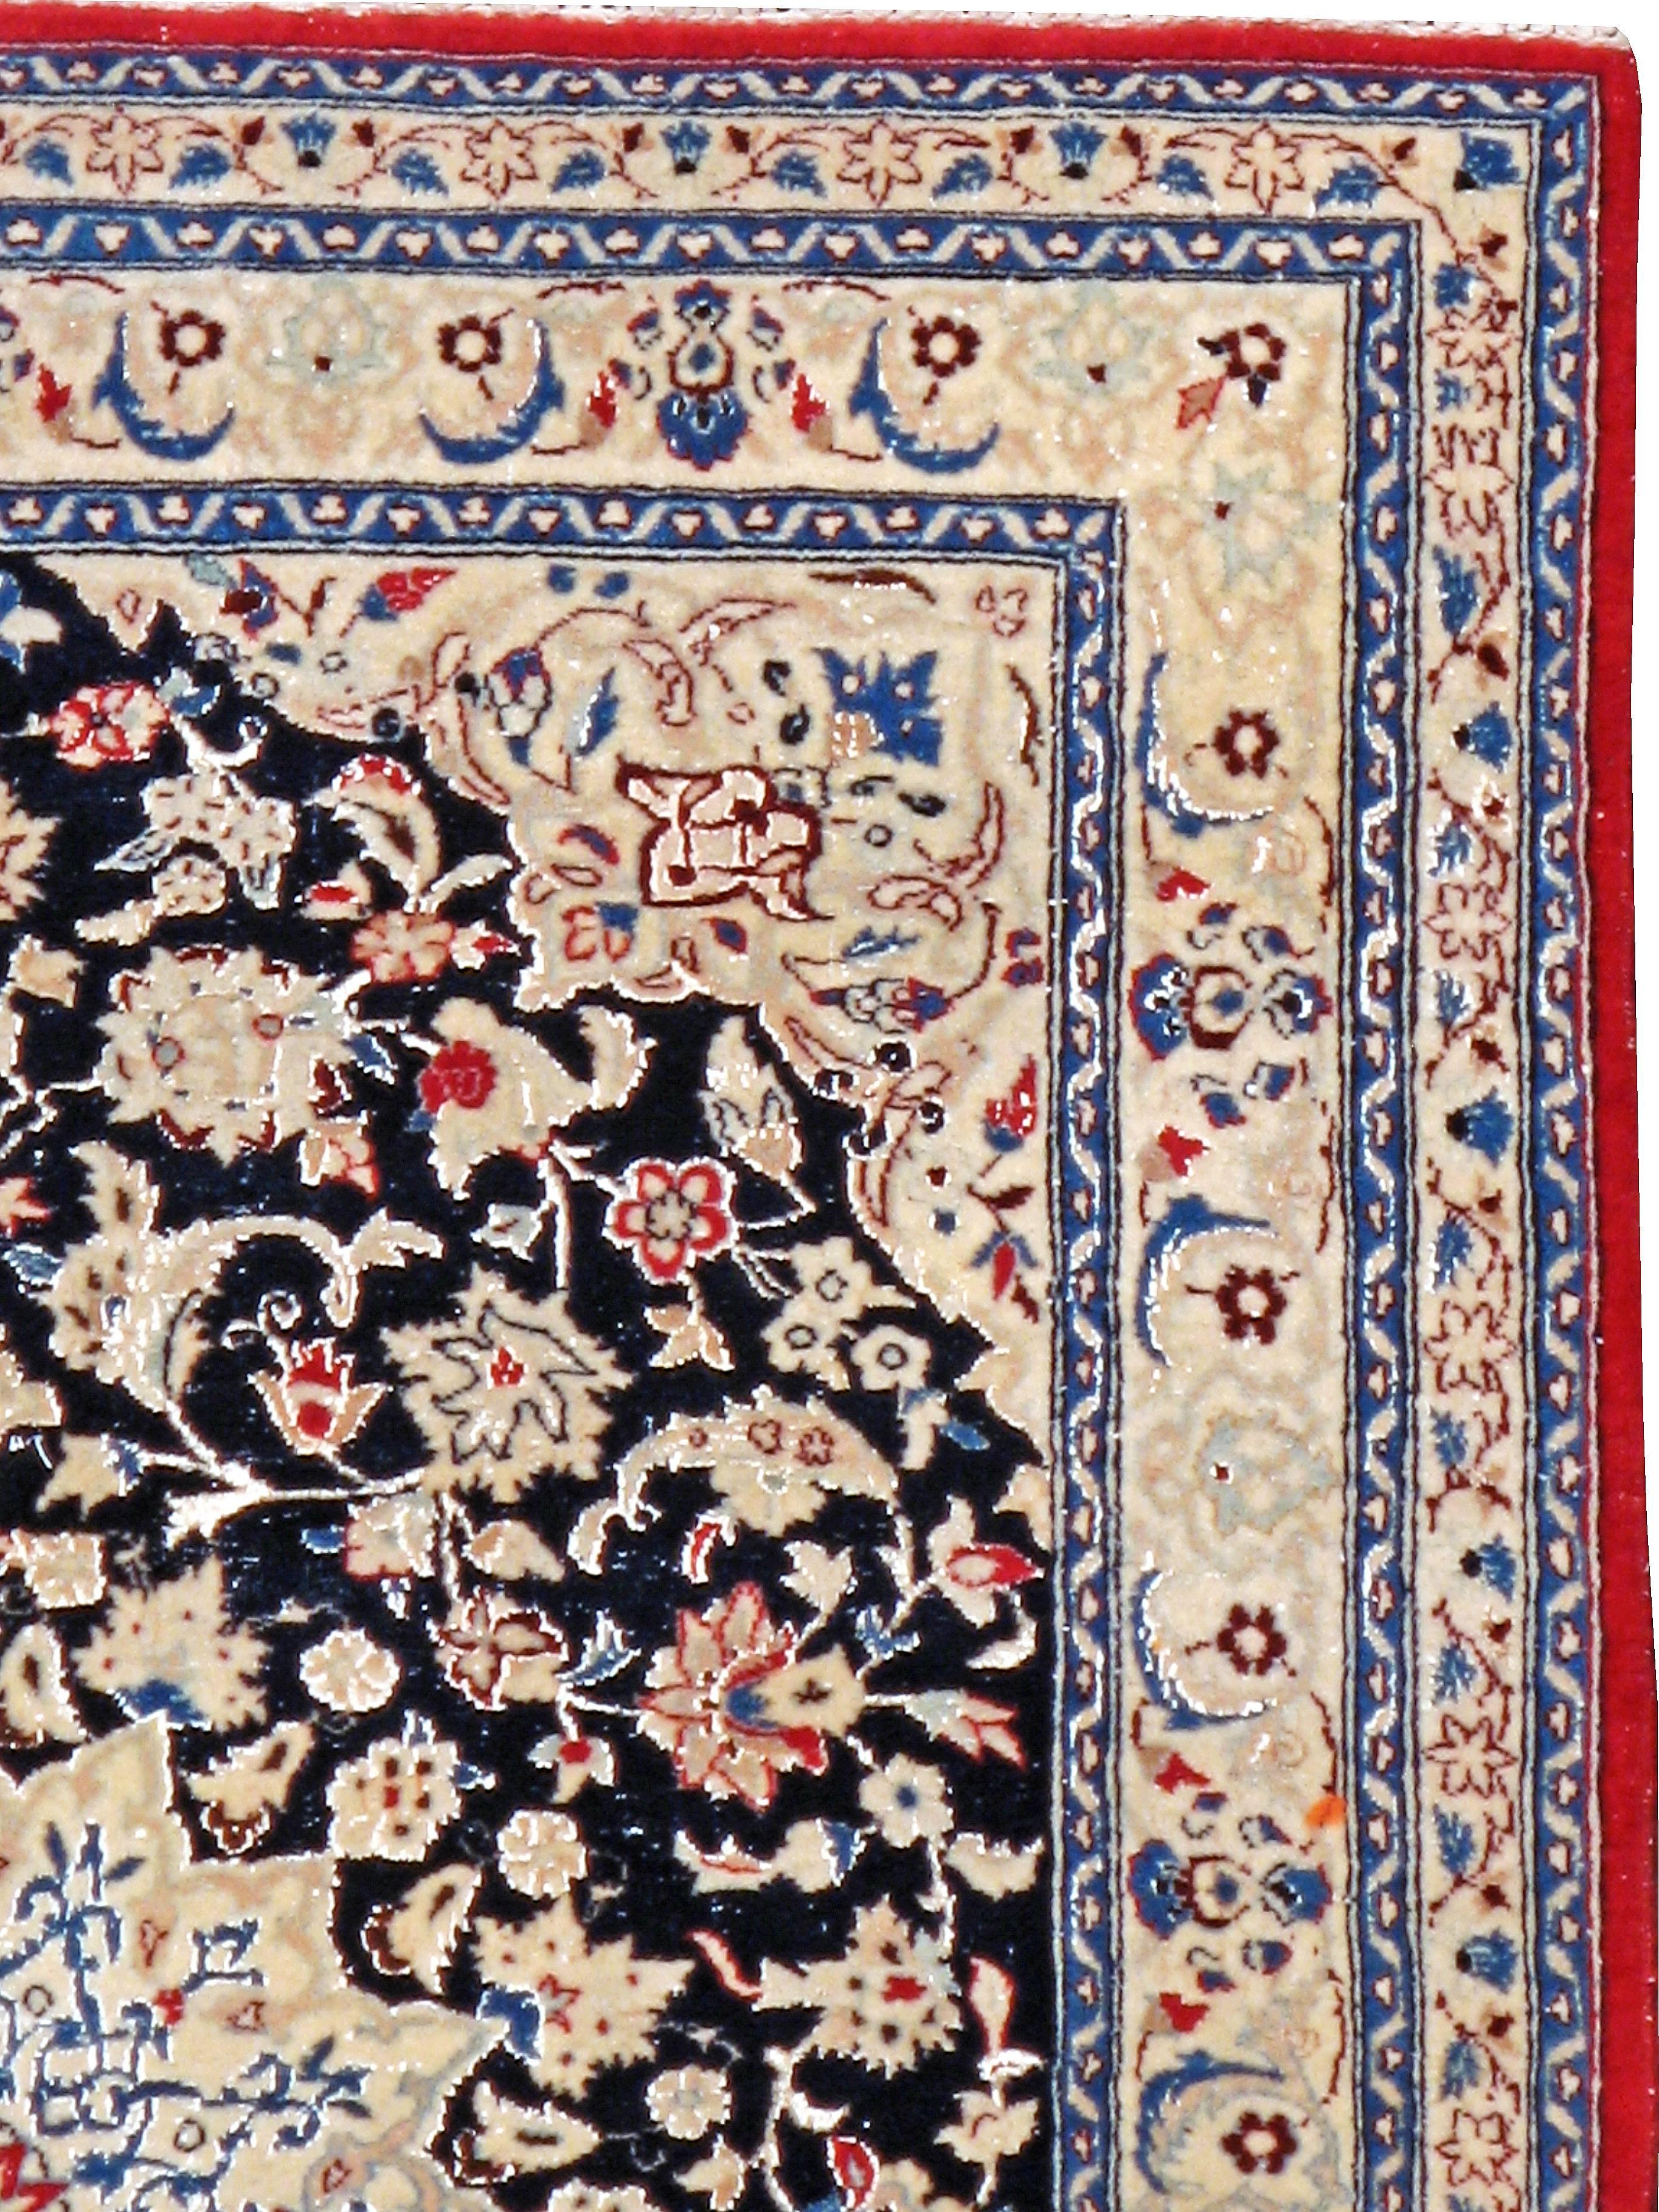 A vintage Persian Nain carpet from the mid-20th century with silk highlights.